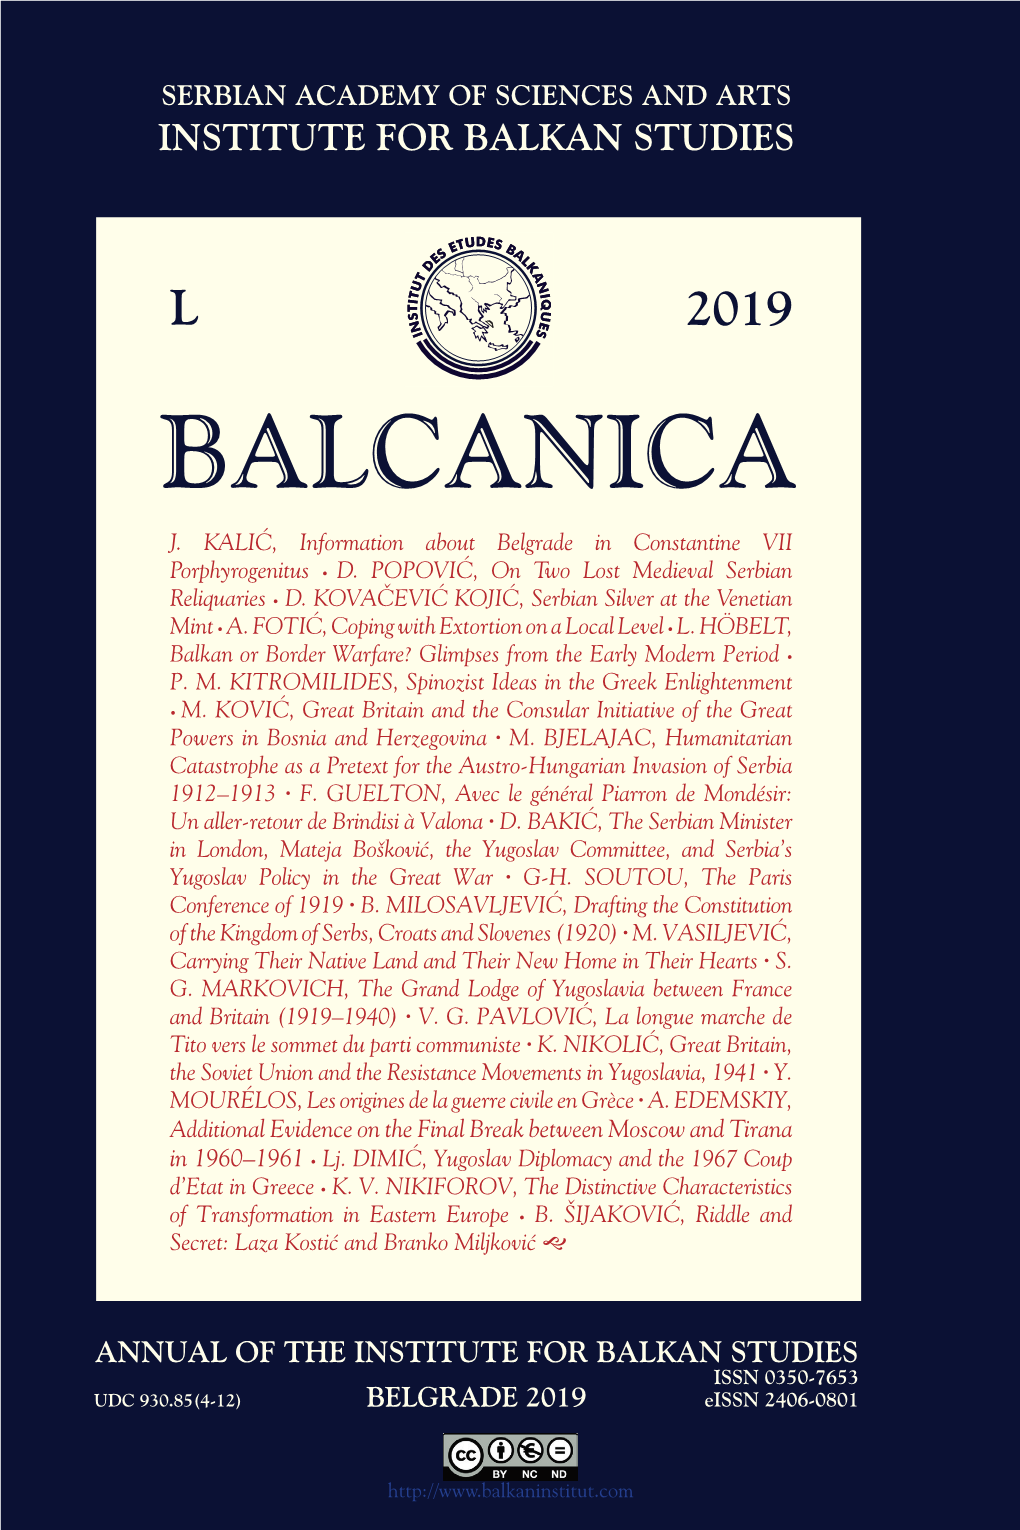 Balcanica L (2019) Pectoral Cross Had the Status of a Holy Weapon and a Guardian of the Realm, Those Ideas Grew in Strength and Importance